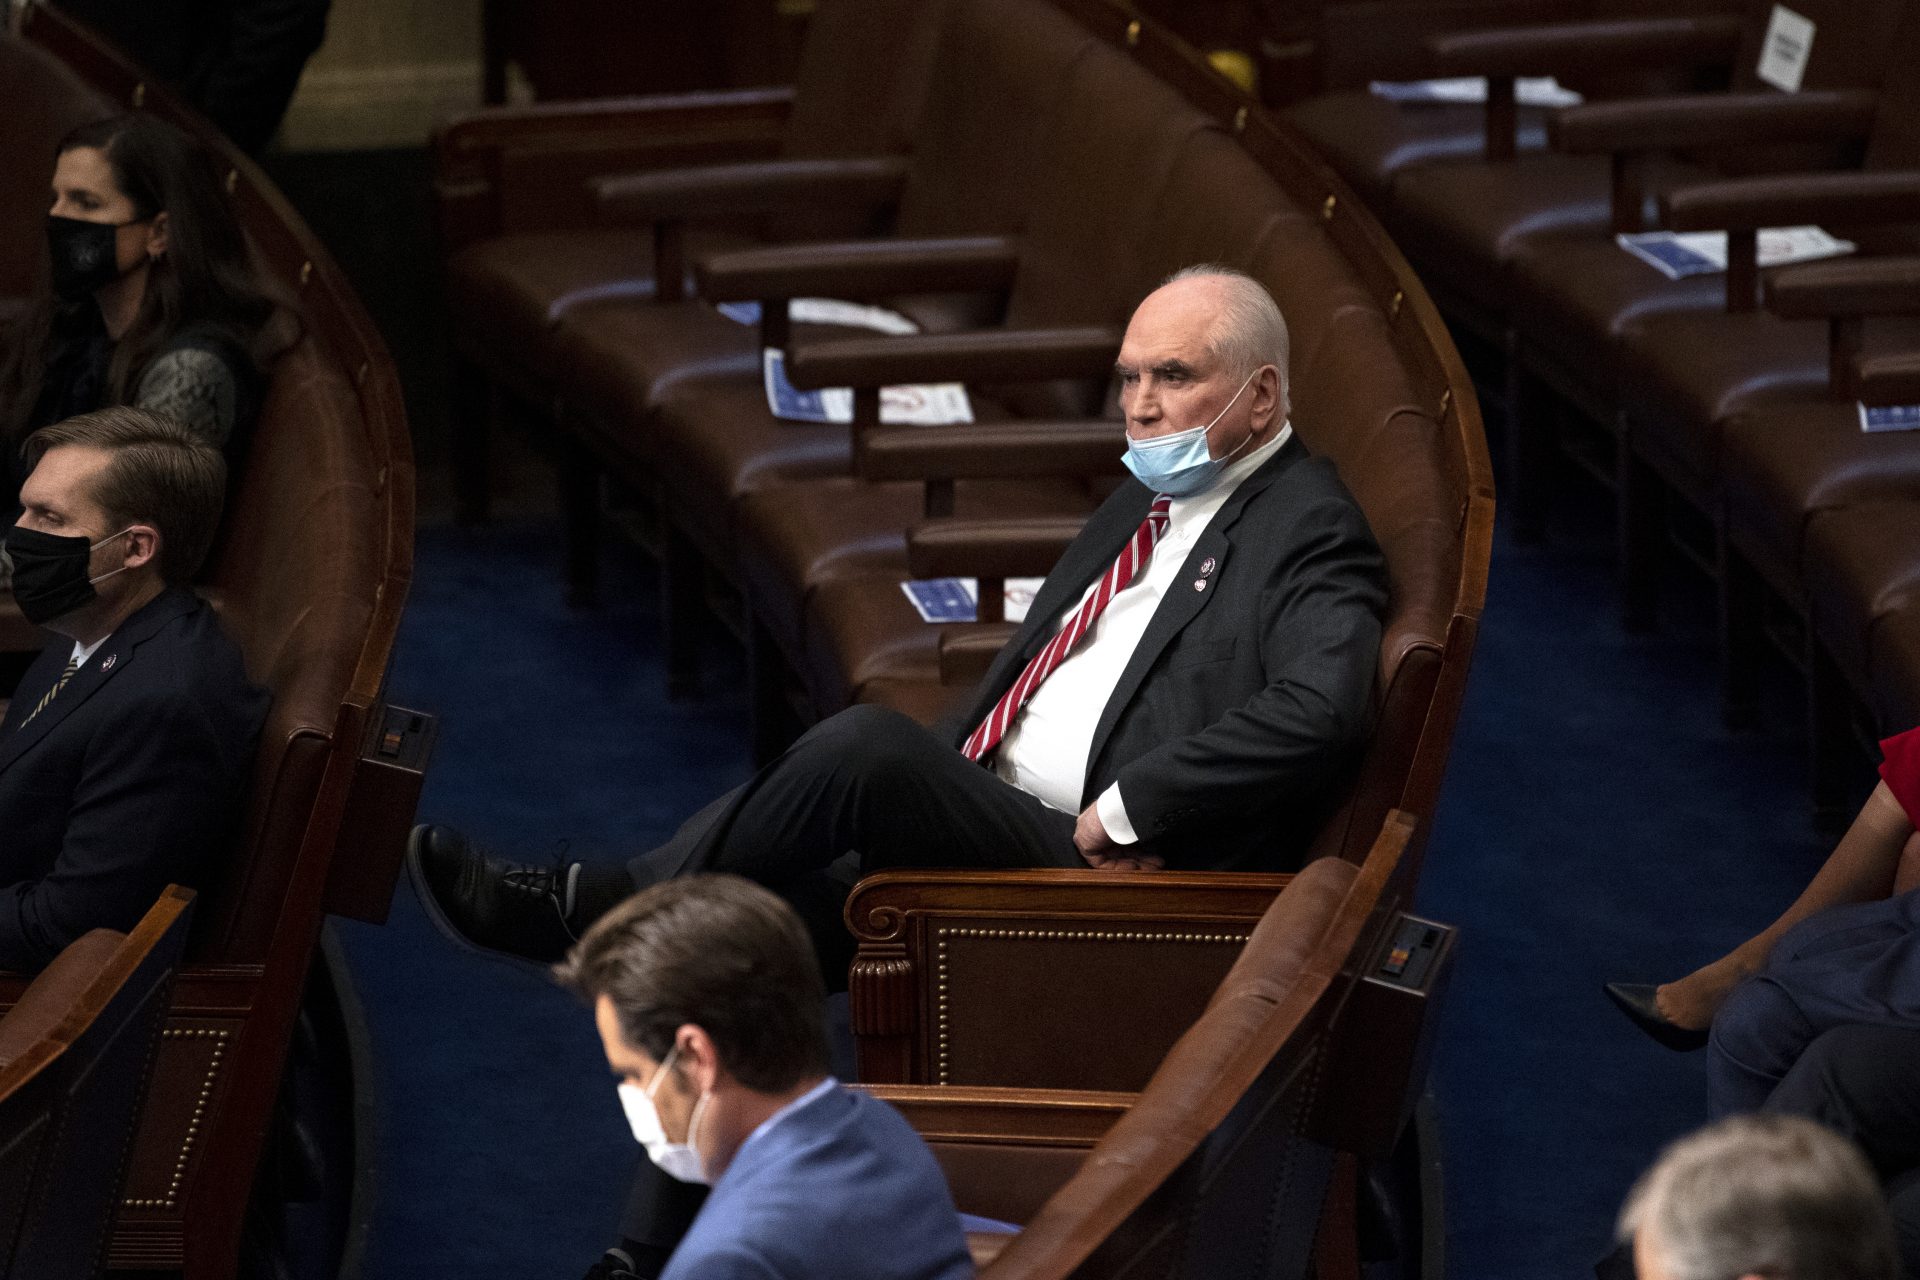 Rep. Mike Kelly, R-Pa., looks on in the House Chamber after they reconvened for arguments over the objection of certifying Arizona’s Electoral College votes in November’s election, at the Capitol in Washington, Wednesday, Jan. 6, 2021.